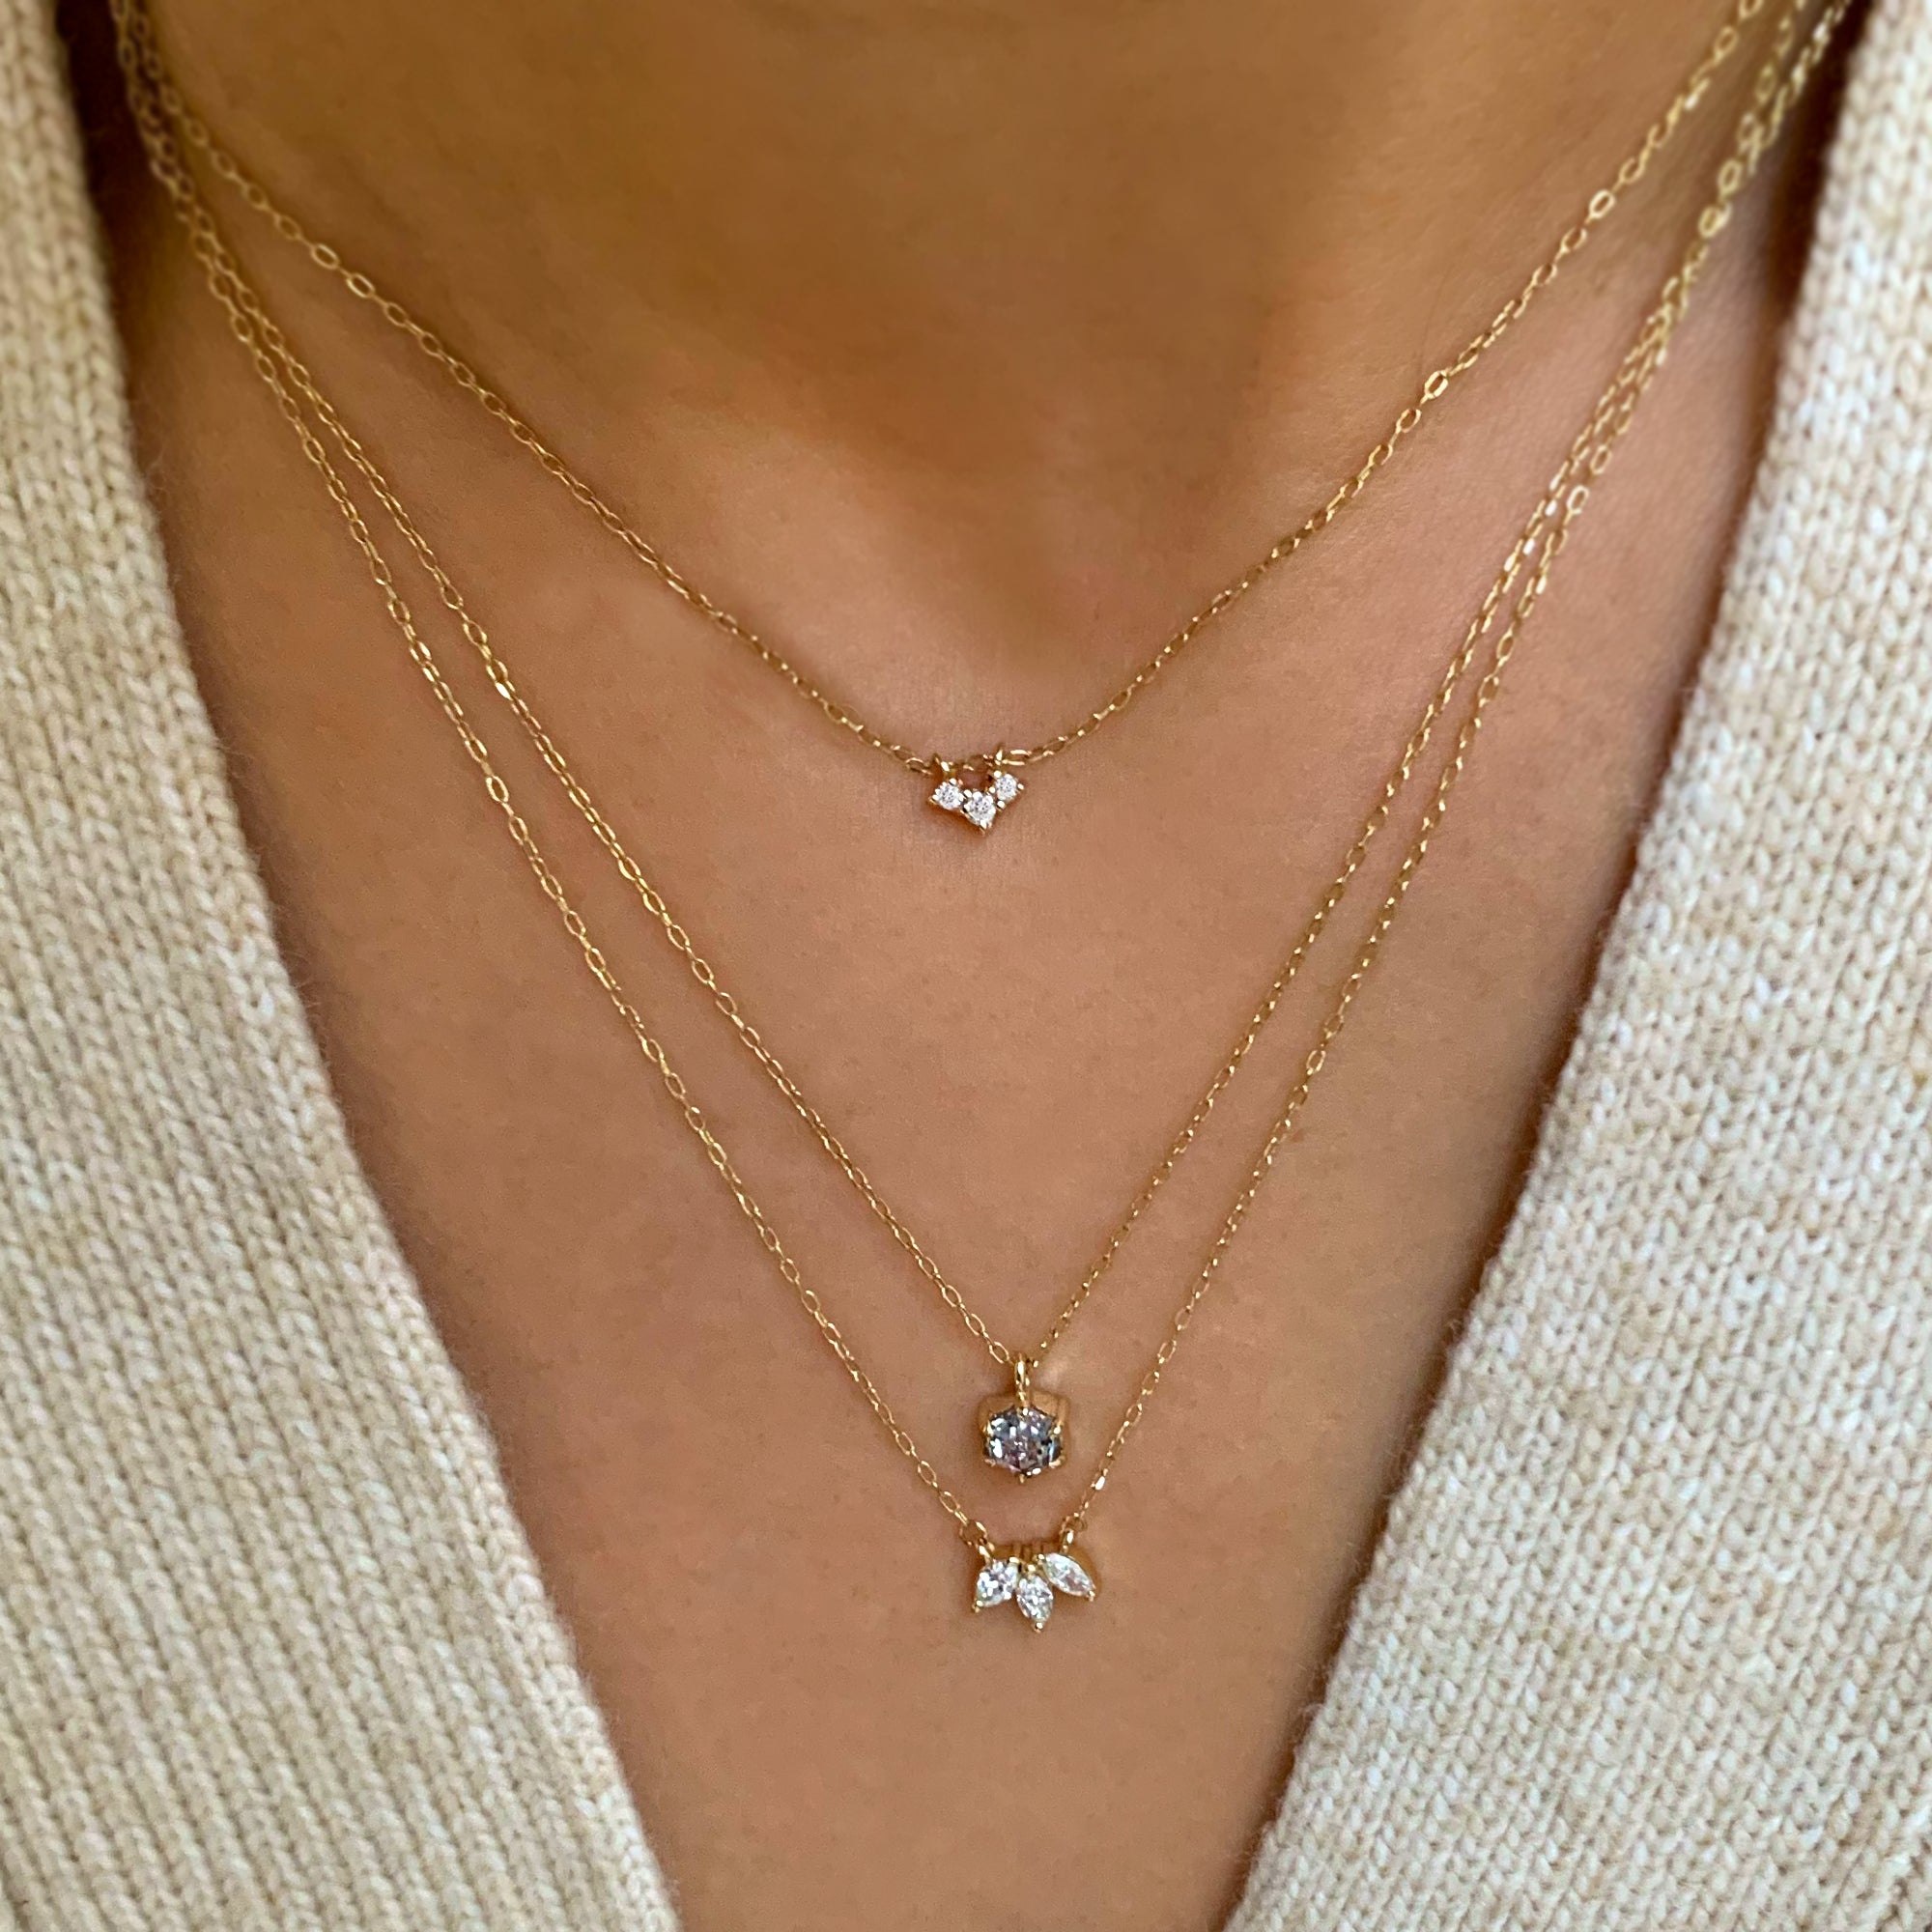 Jamie Park Jewelry - Marquise Diamond Trio Necklace https://jamieparkjewelry.com/products/marquise-diamond-trio-necklace The Marquise Diamond Trio Necklace features three marquise-cut natural diamonds for a simple, stylish look. Perfectly suited to add an eye-catching pop of color to an outfit, this necklace is ideal for any daily style. The Marquise Emerald Trio Necklace is available here.